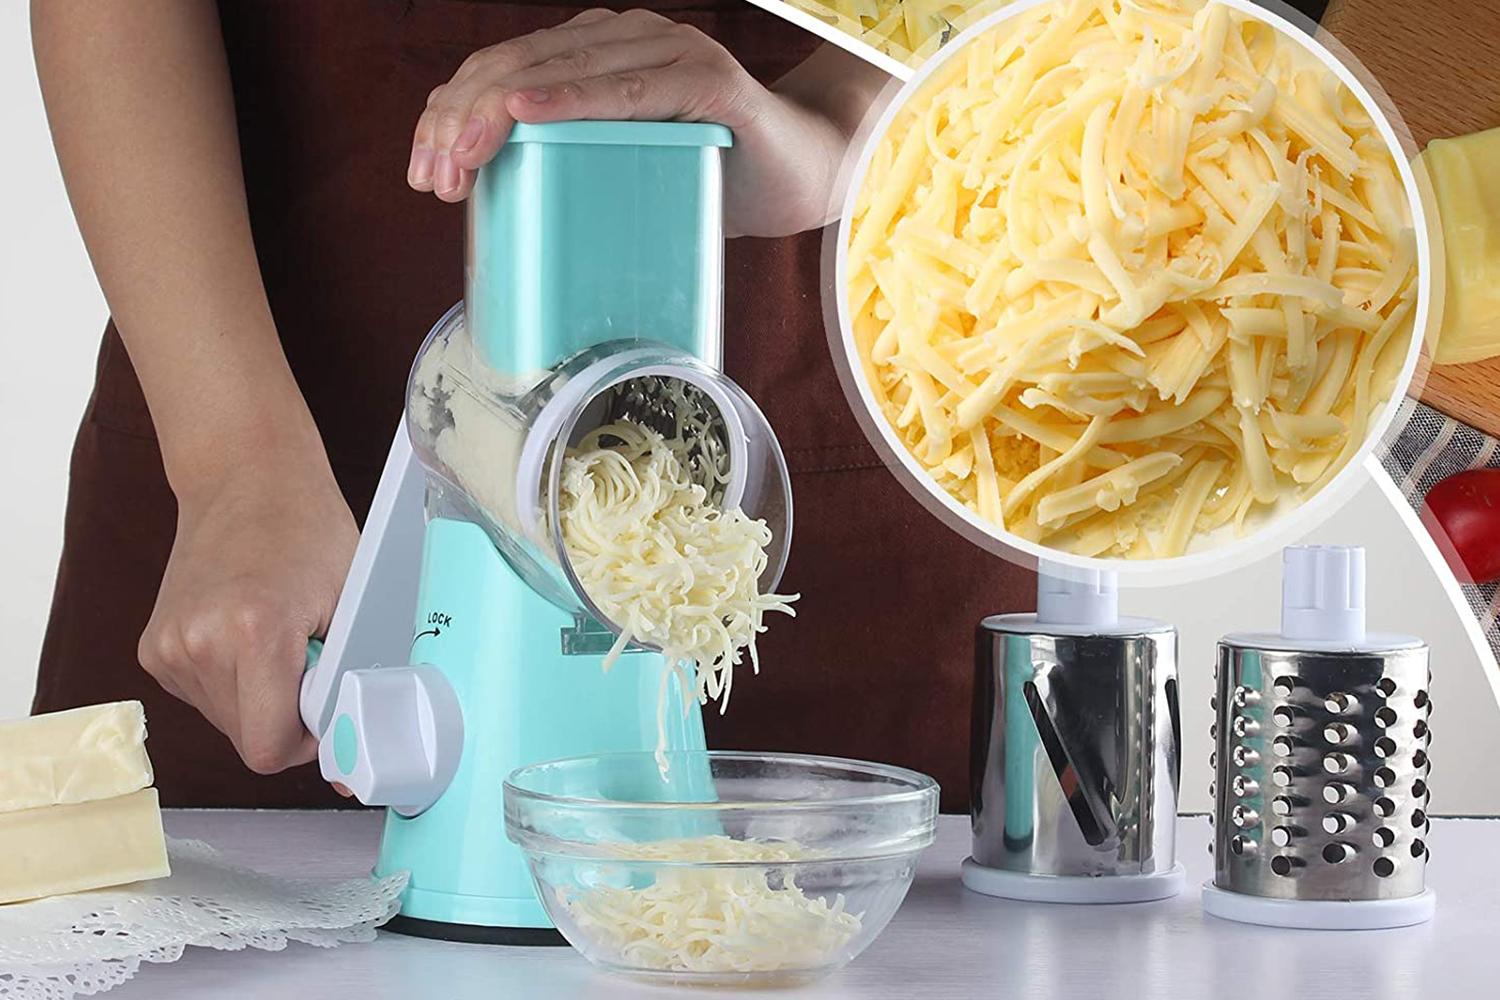 https://www.themanual.com/wp-content/uploads/sites/9/2021/03/tevokon-cheese-grater.jpg?fit=800%2C533&p=1